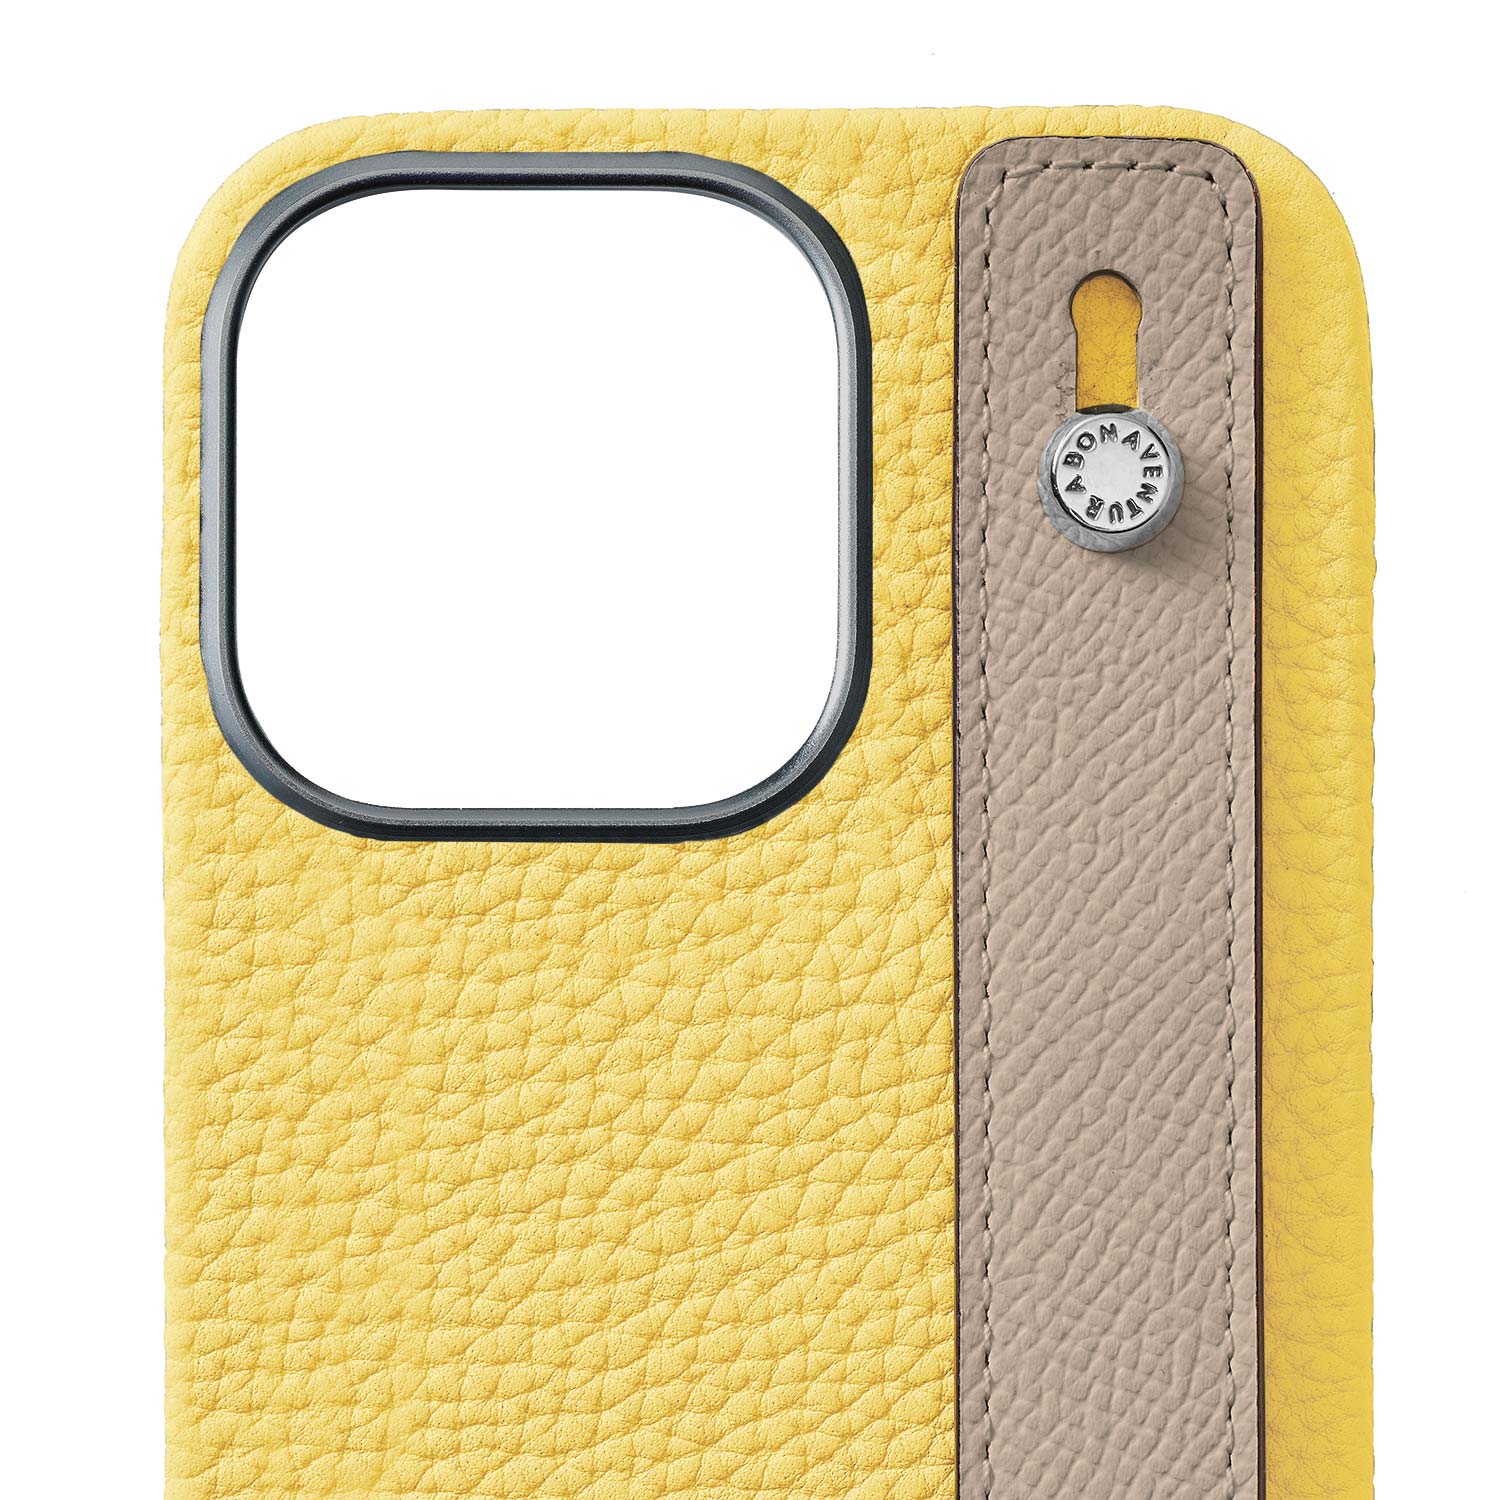 (iPhone 15 Pro Max) Back cover case with handle, shrink leather